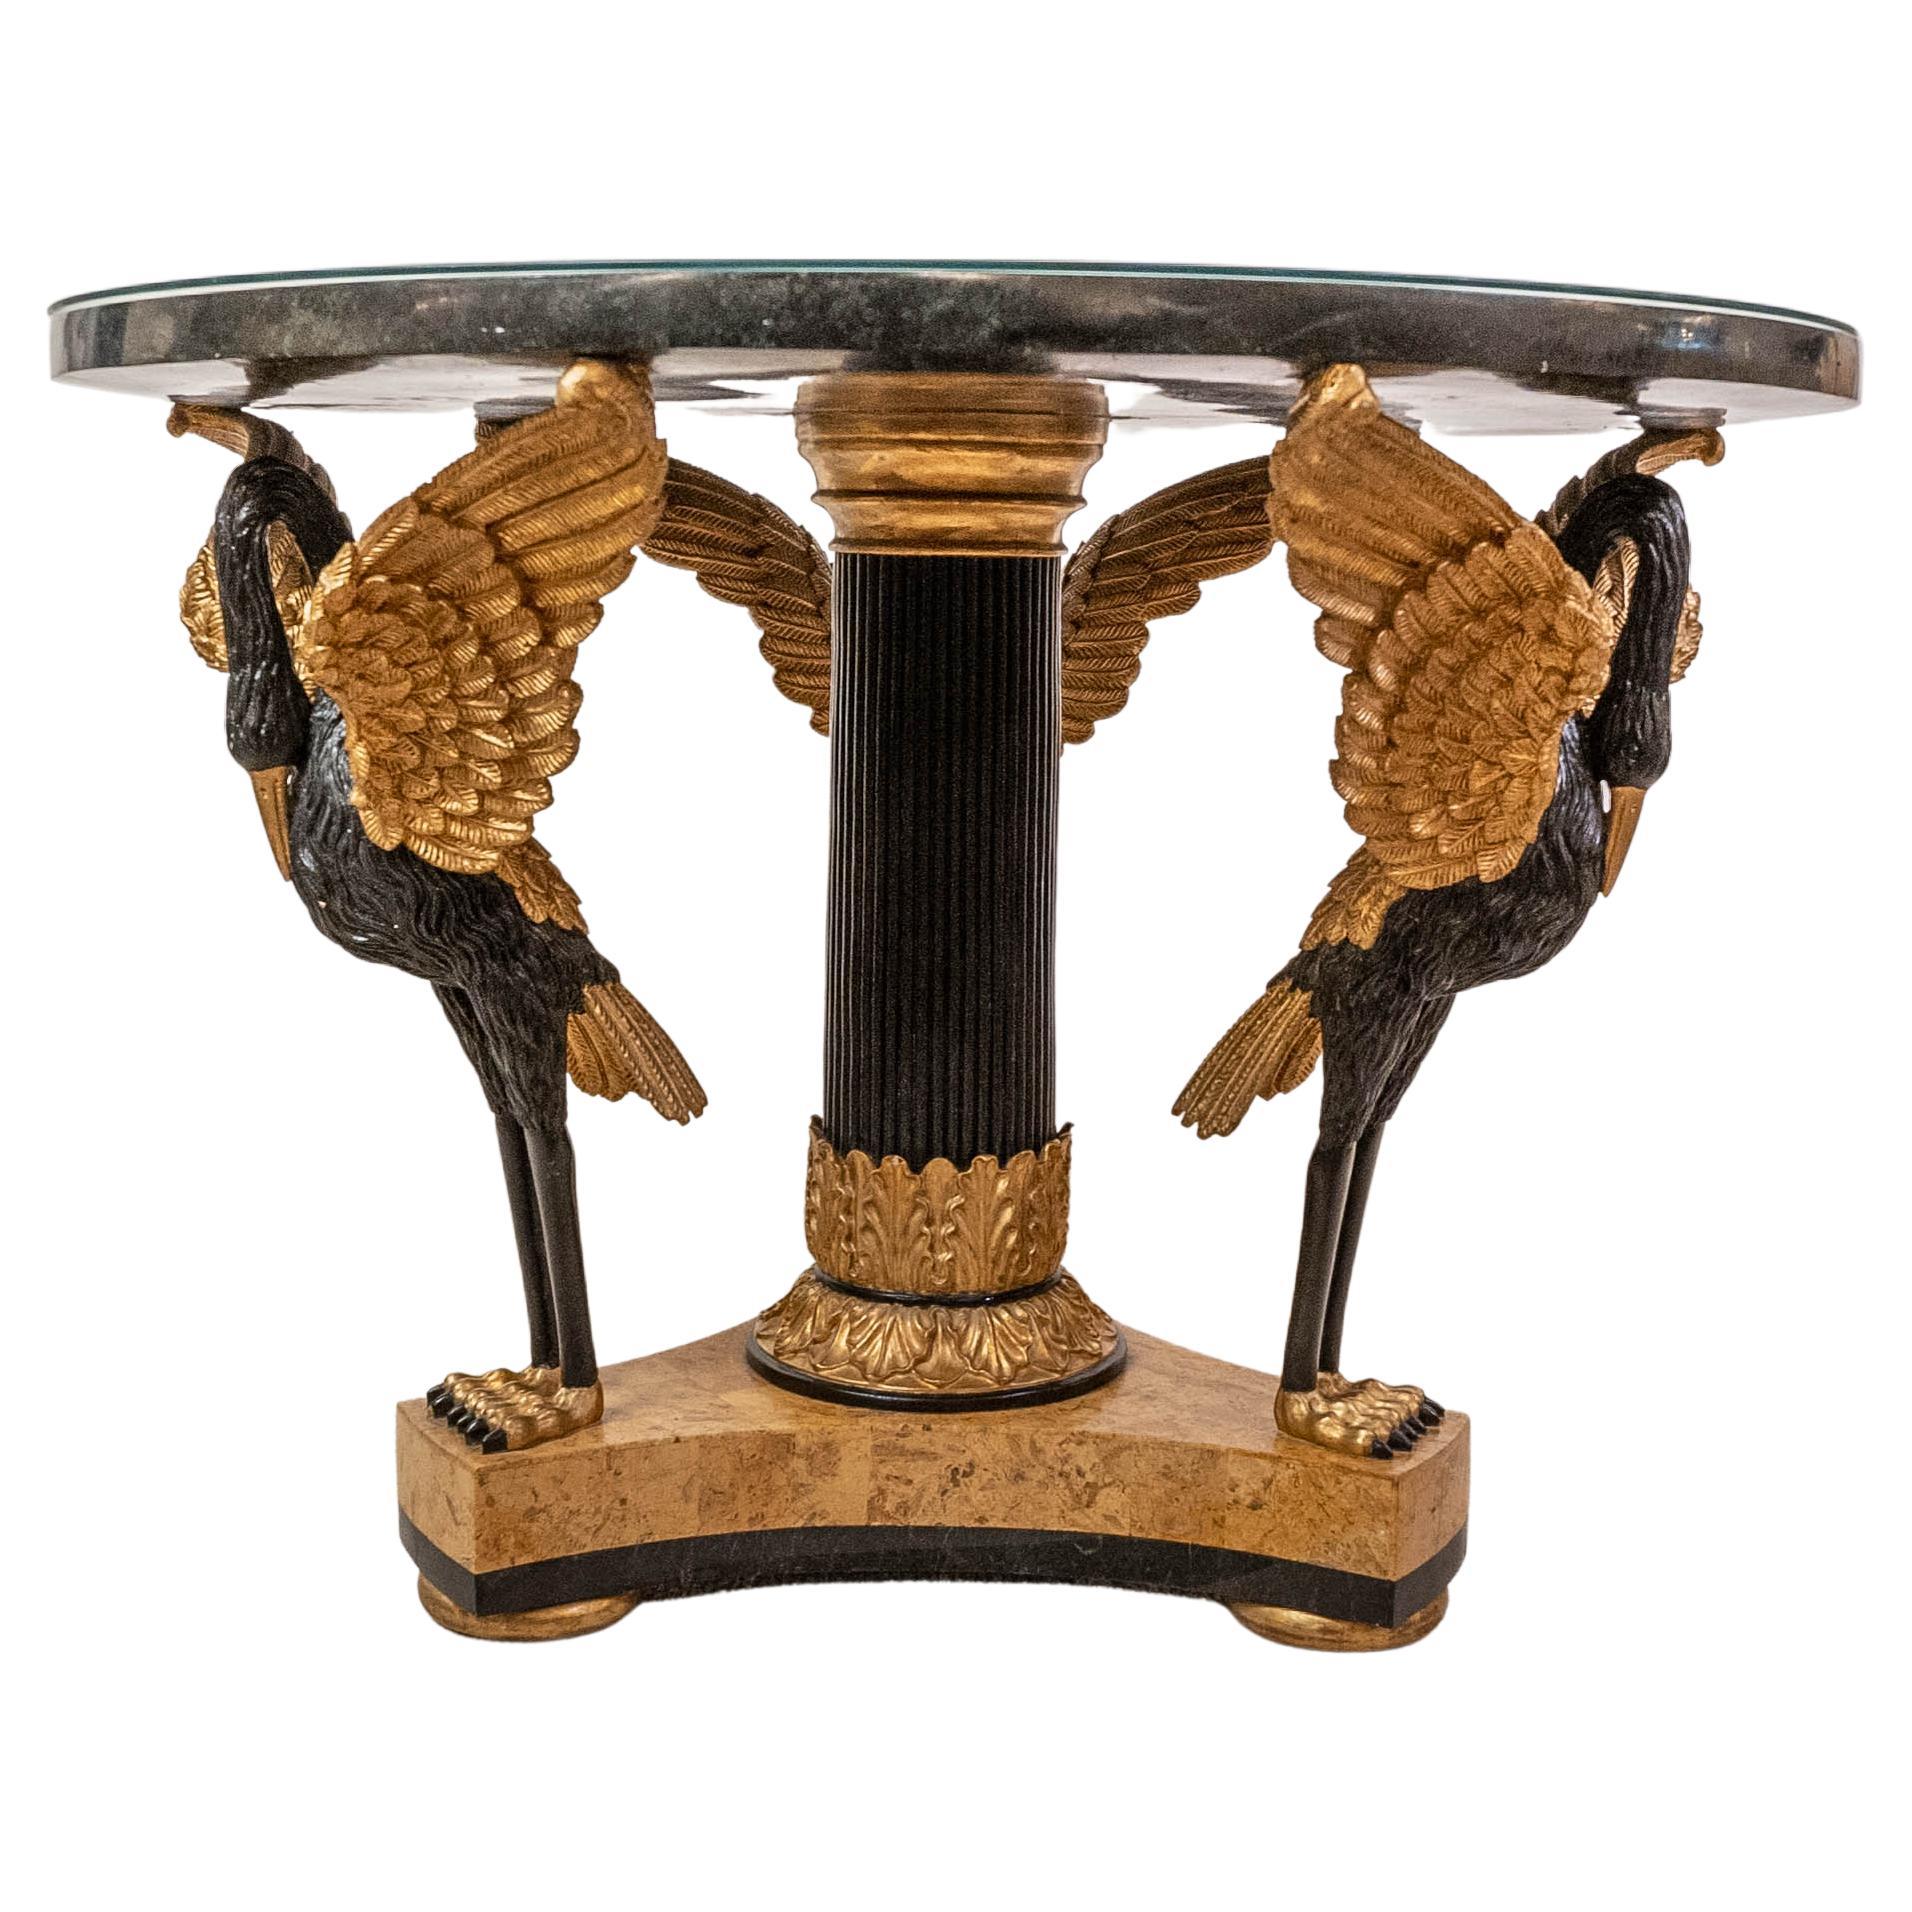 Sensational one of a kind custom Hollywood Regency style Italian Pietra Dura foyer center table having a striking combination of ebonized & gilt carved swans and pedestal. The gilt carved swans are in the manner of Maison Jansen. Gorgeous acanthus